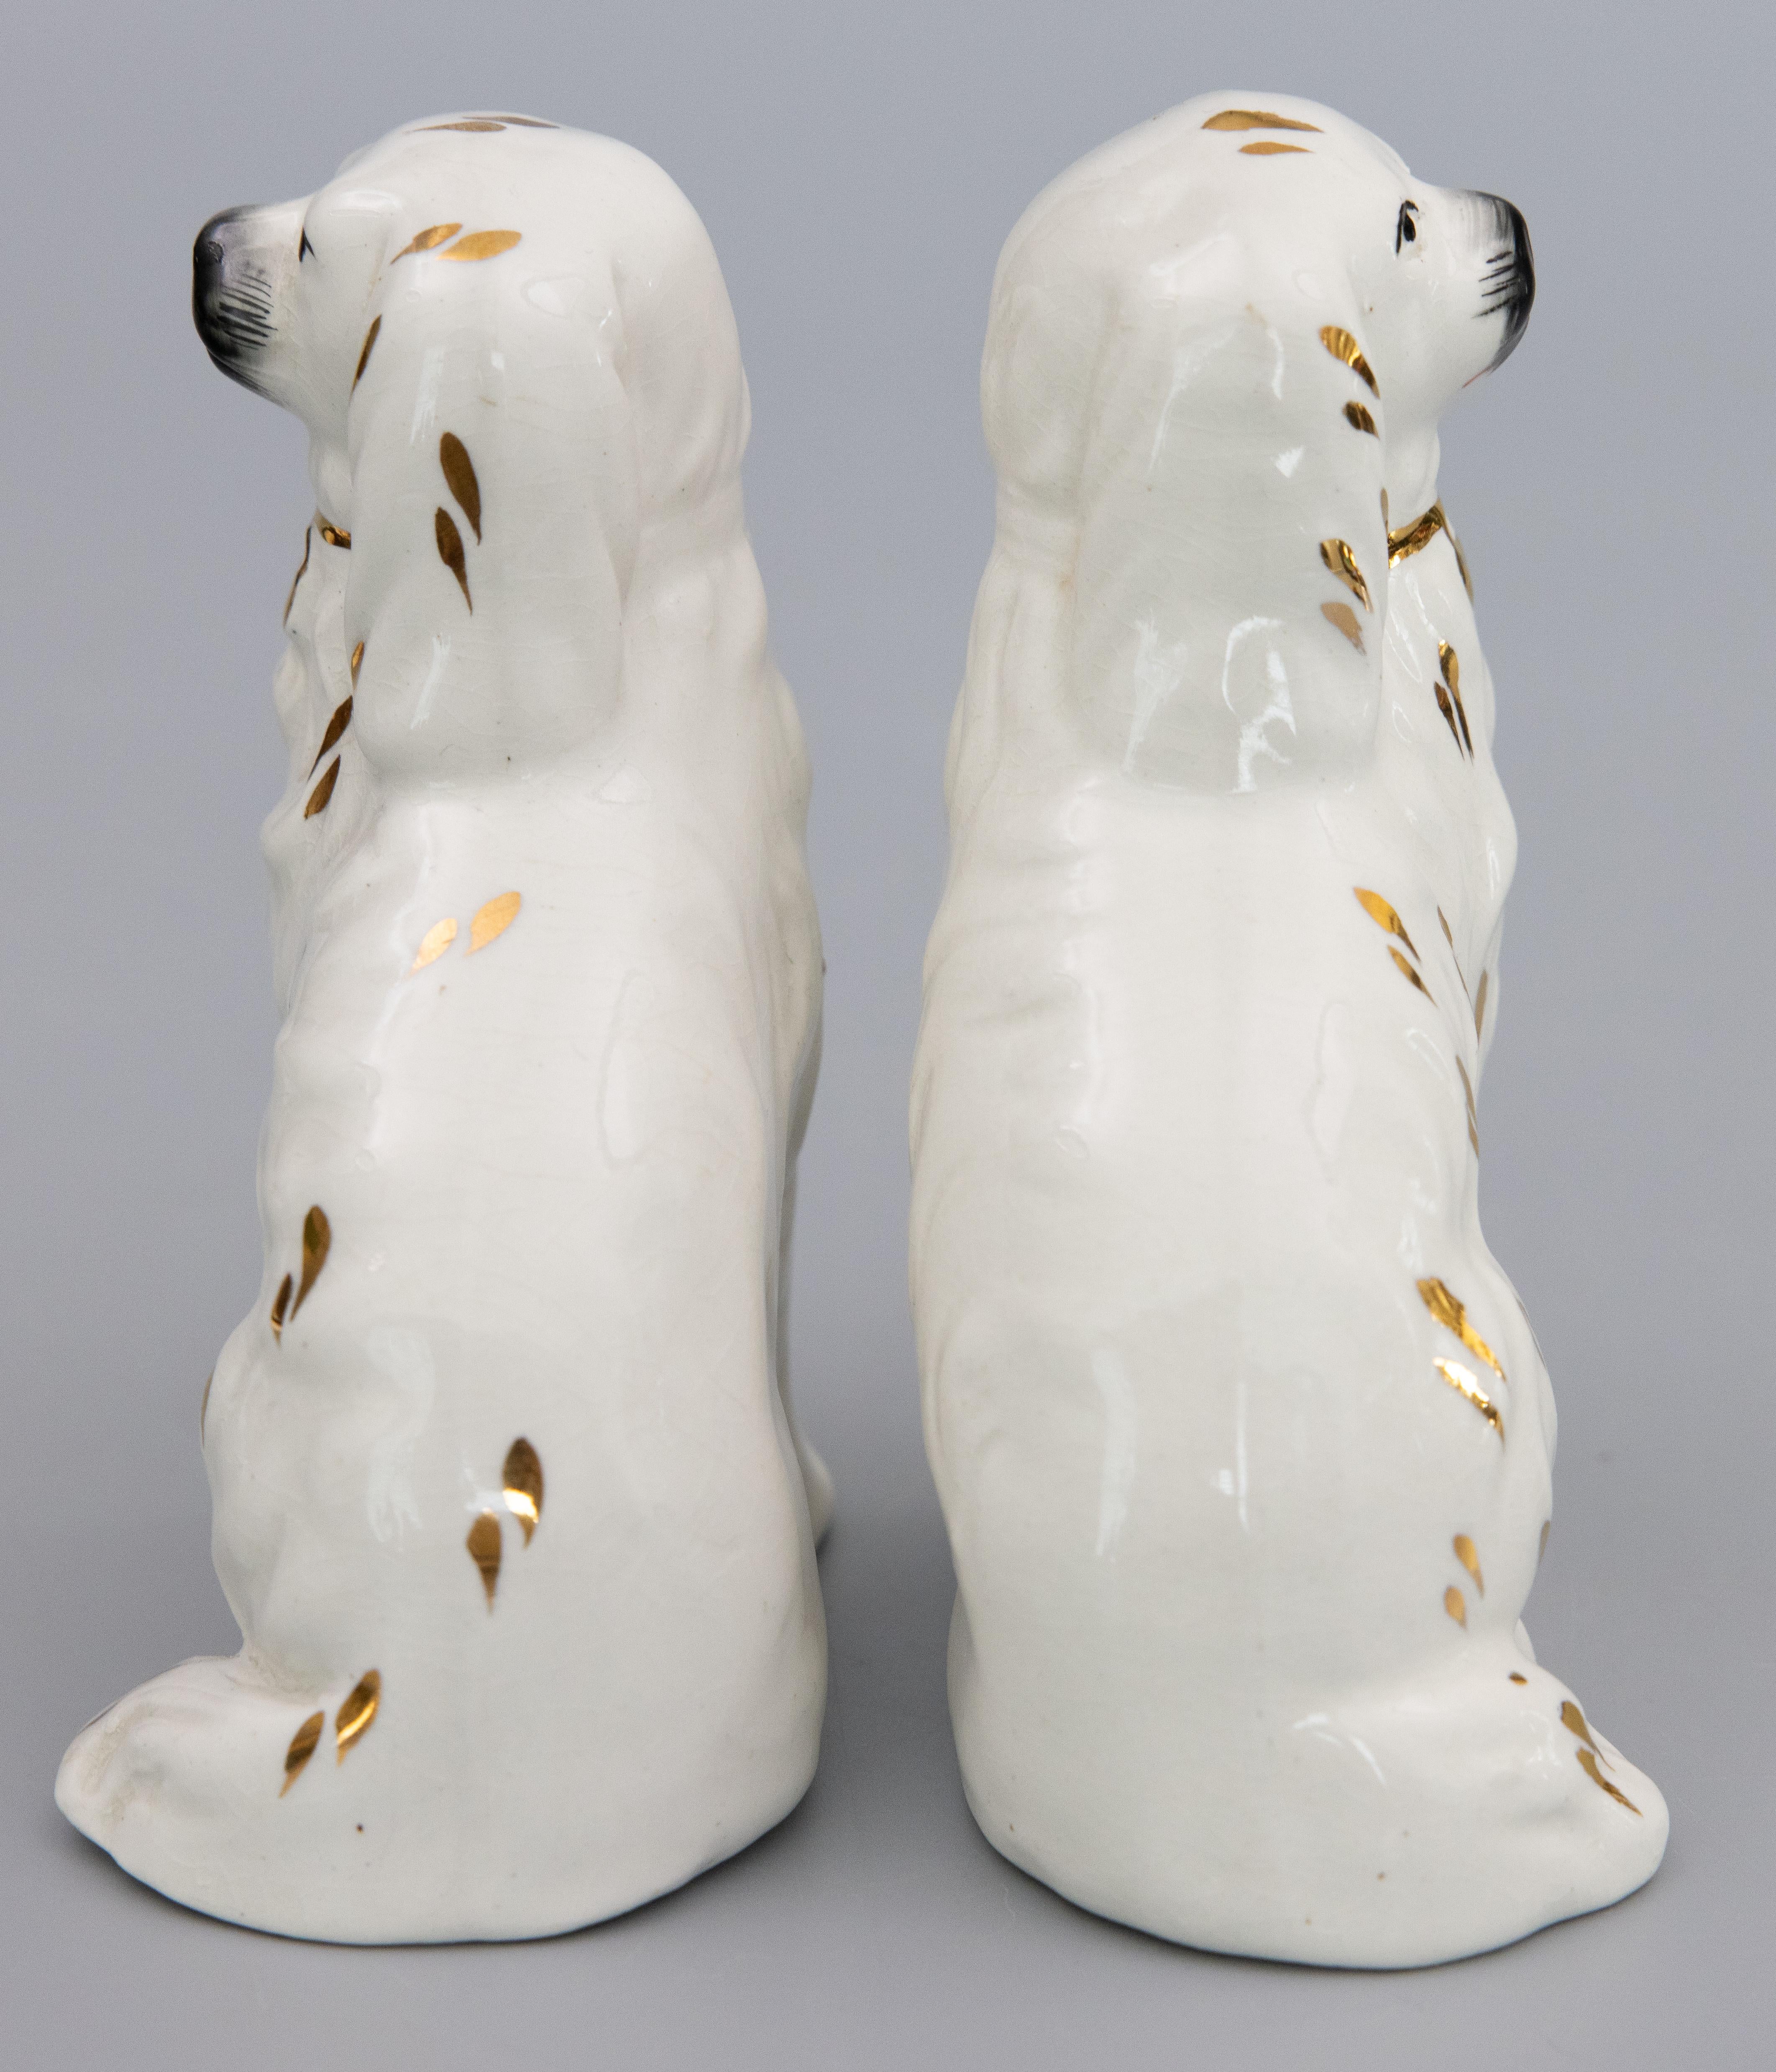 A wonderful pair of antique early 20th-Century English Staffordshire spaniel dogs with gilt accents. Maker's mark on reverse. These charming dogs are hand painted with beautiful details and the sweetest expressions. It's hard not to be smitten! They